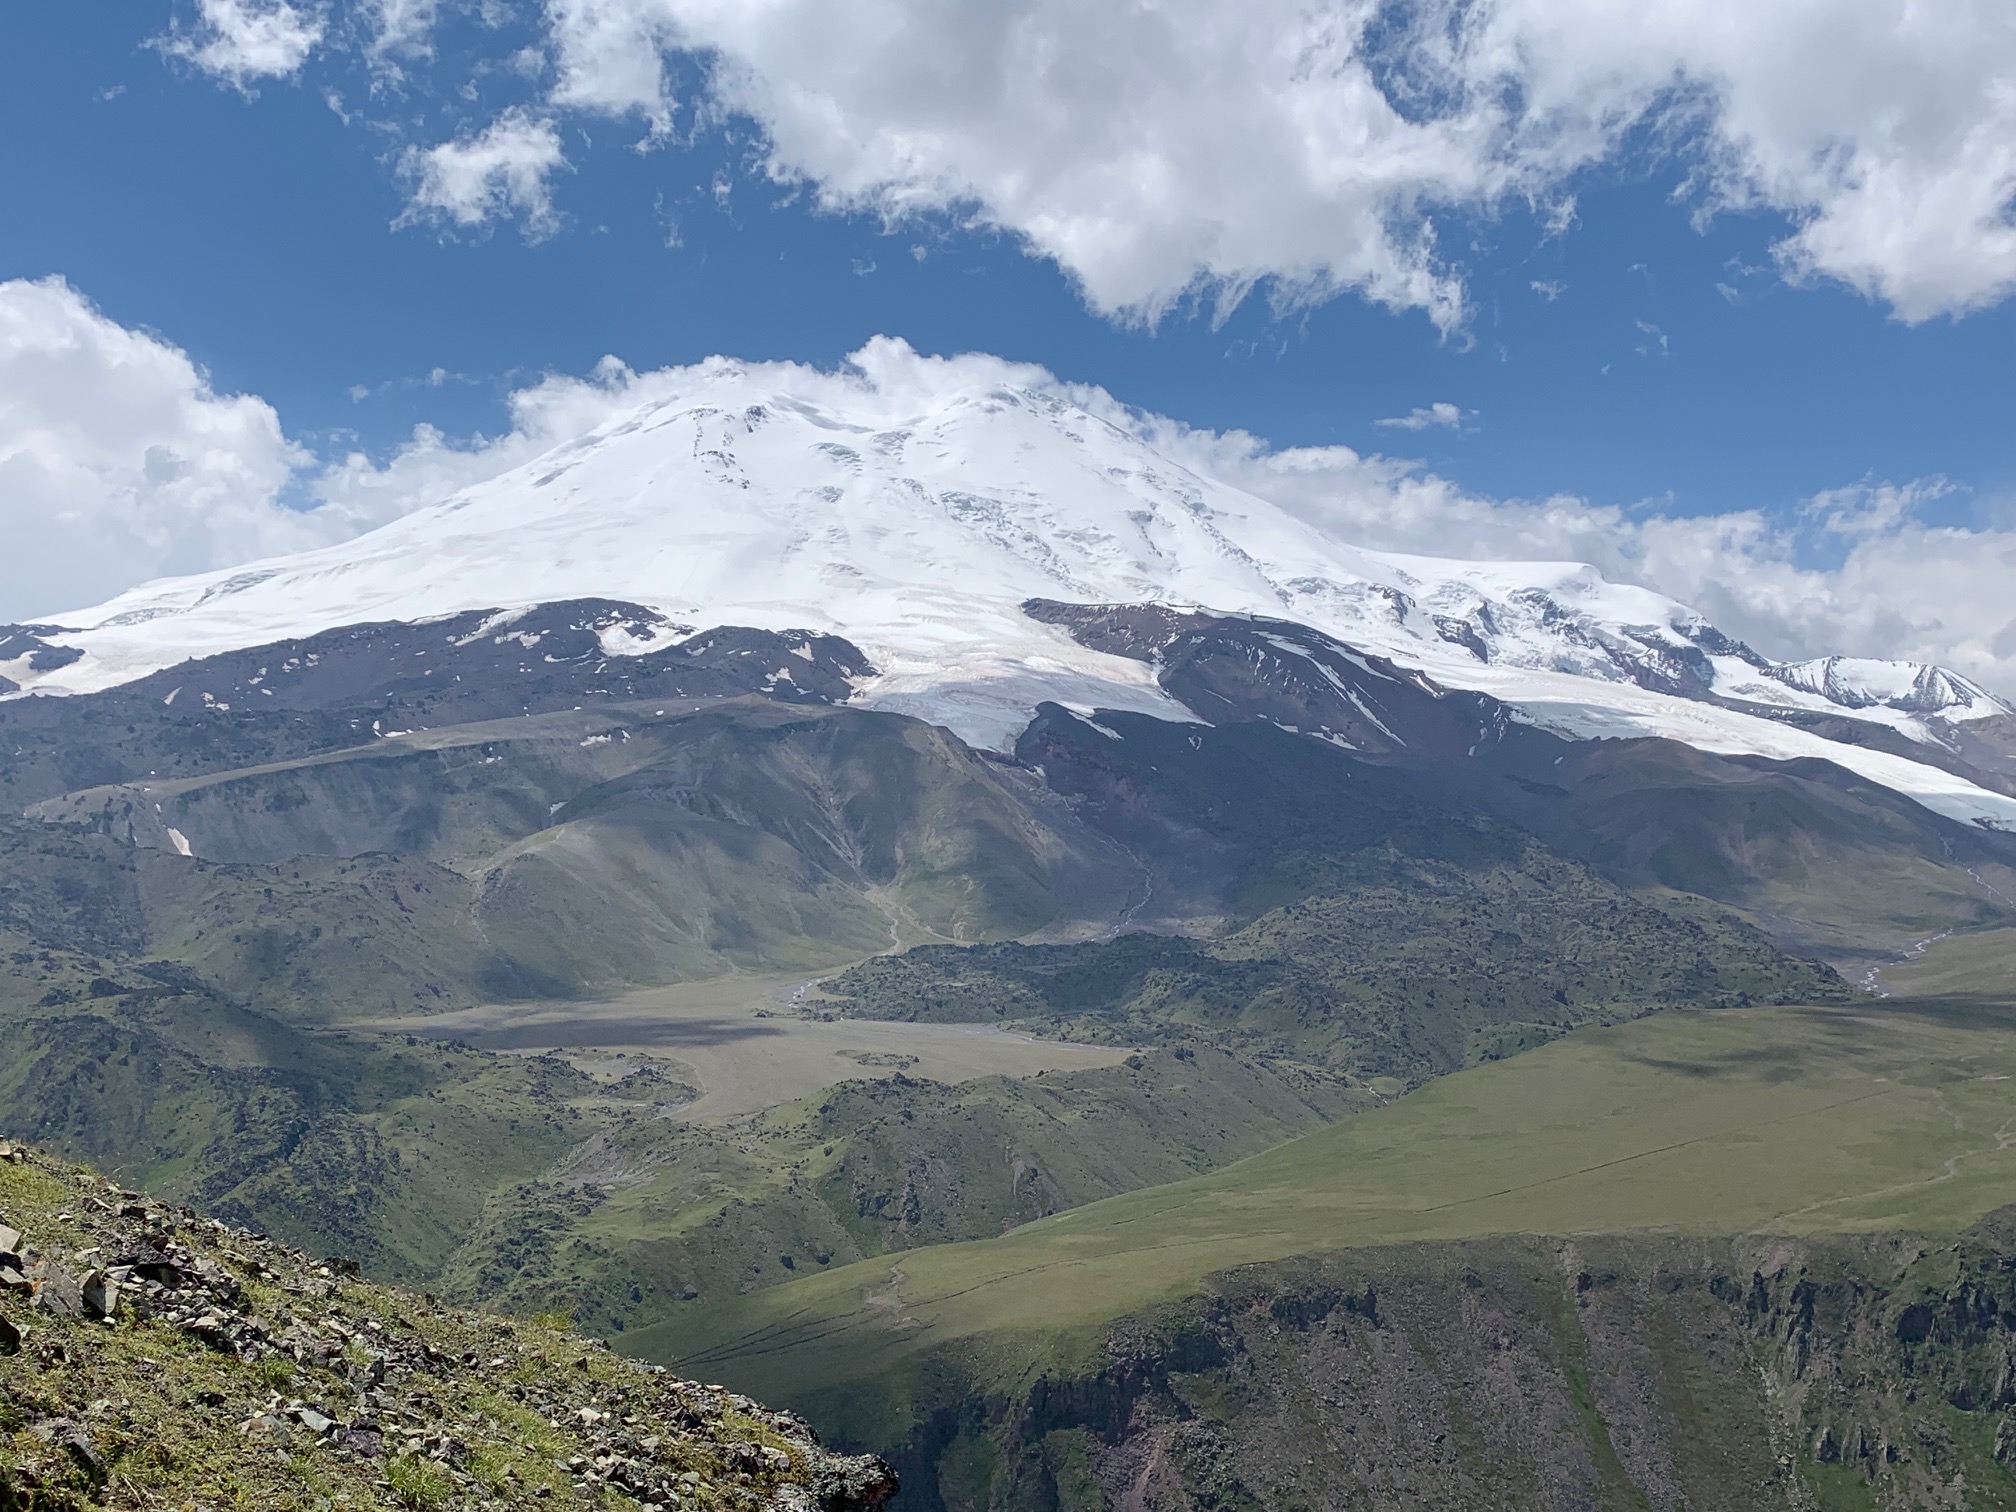 Looking at Mount Elbrus from the North